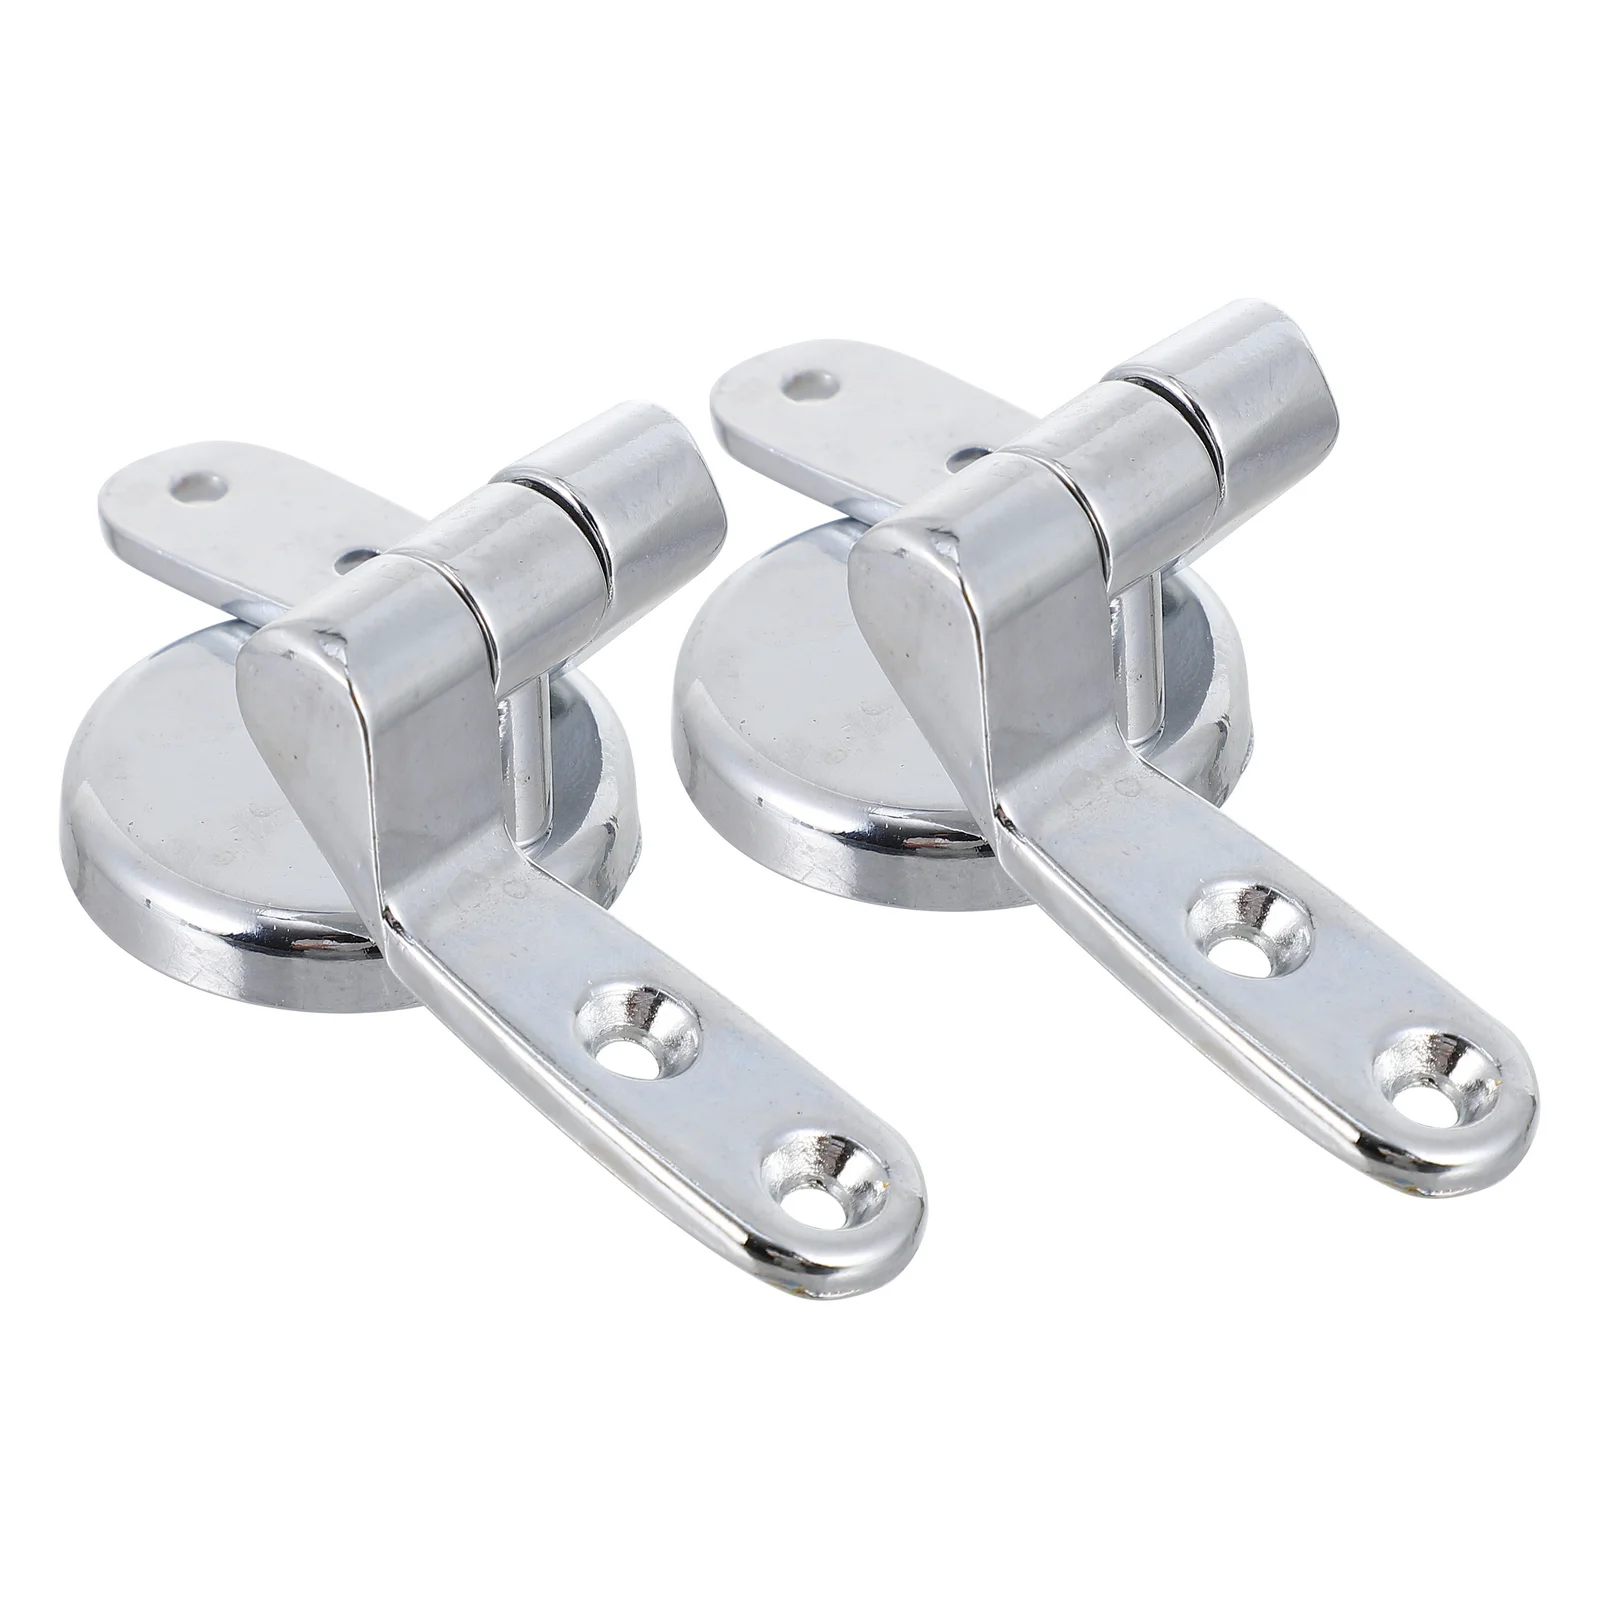 

2pcs Stainless Steel Toilet Hinge Adjustable Toilet Bolts Nuts Washers Toilet Replacement Parts for Toilet Cover Fixing Fitting